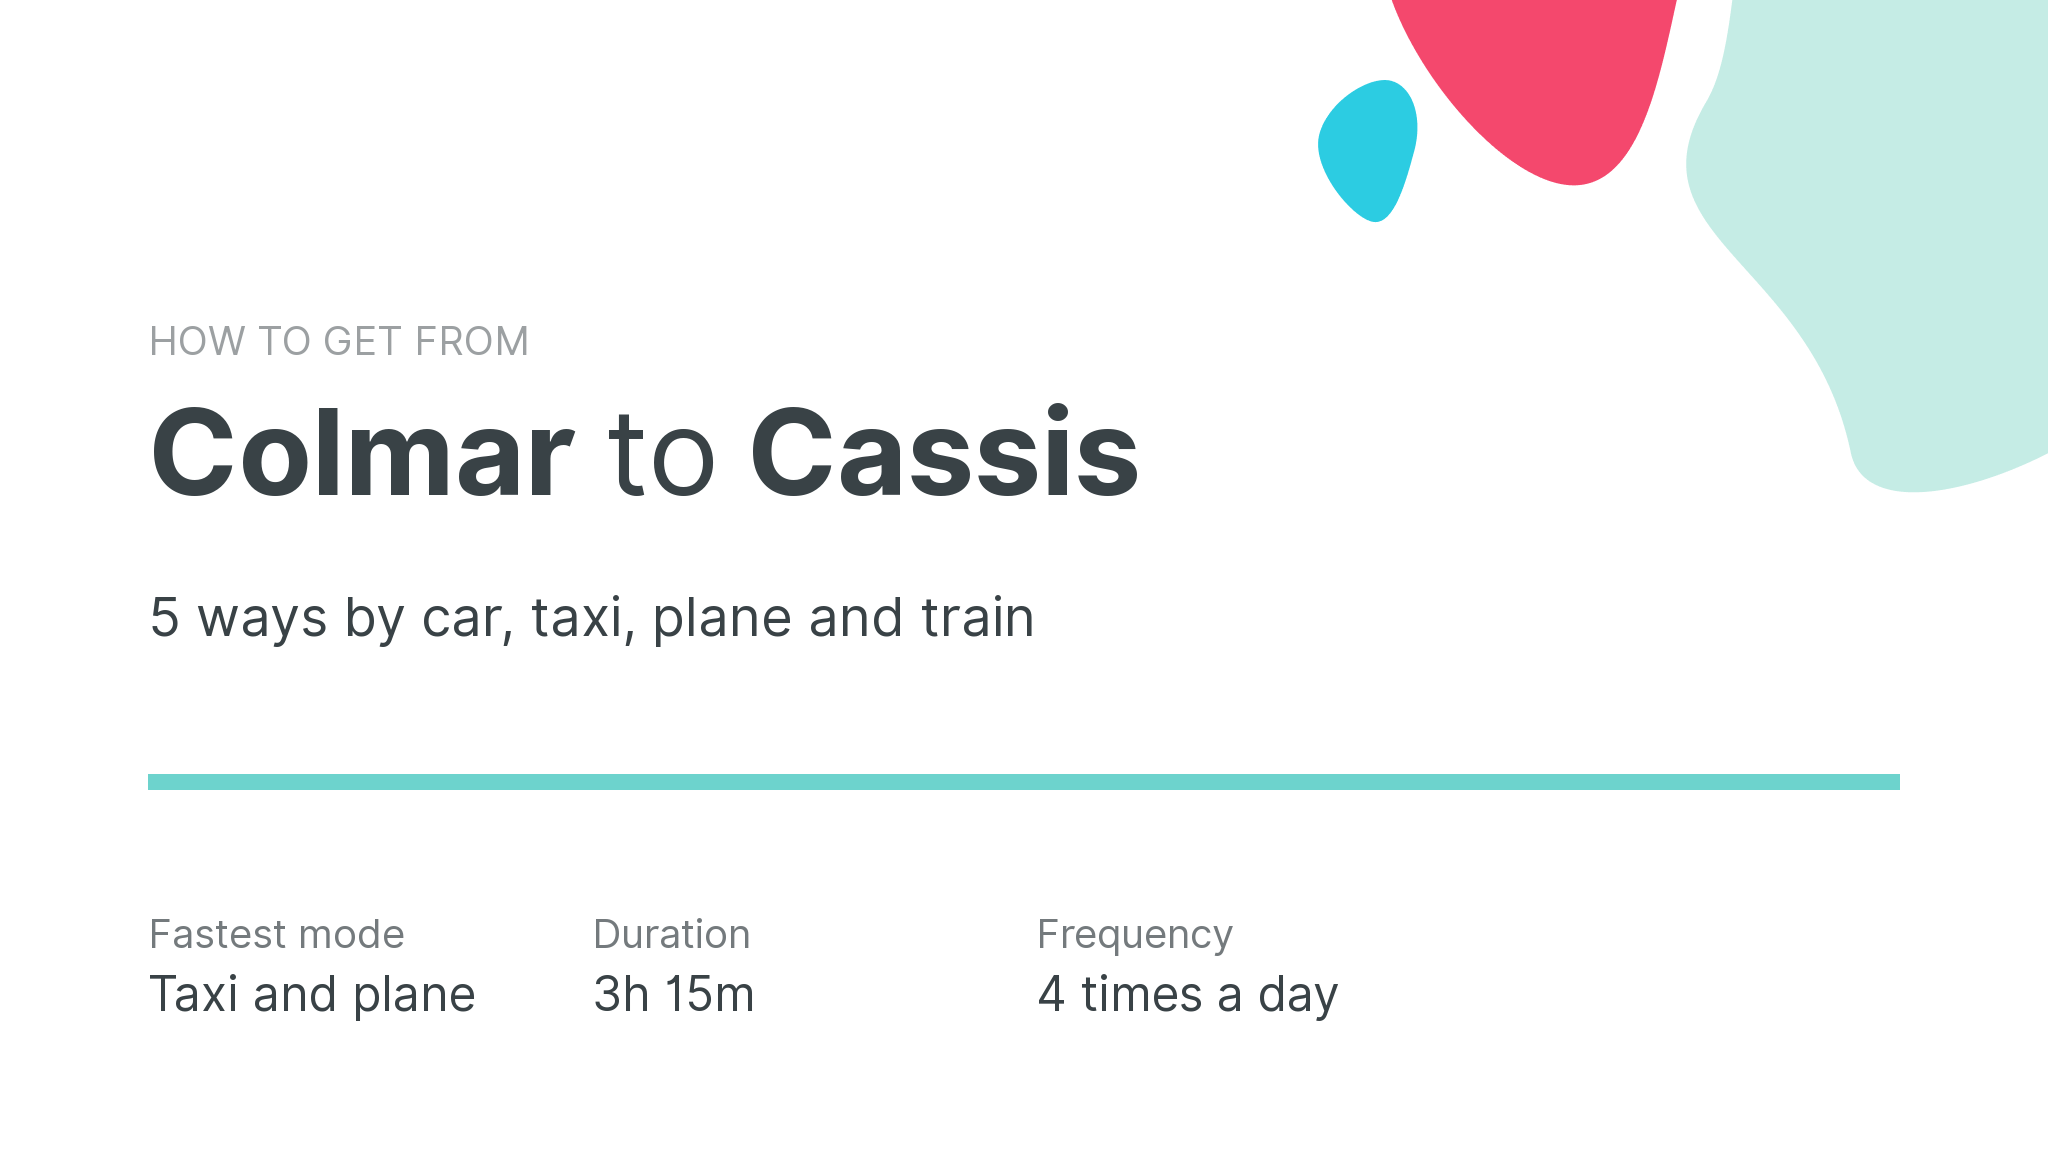 How do I get from Colmar to Cassis